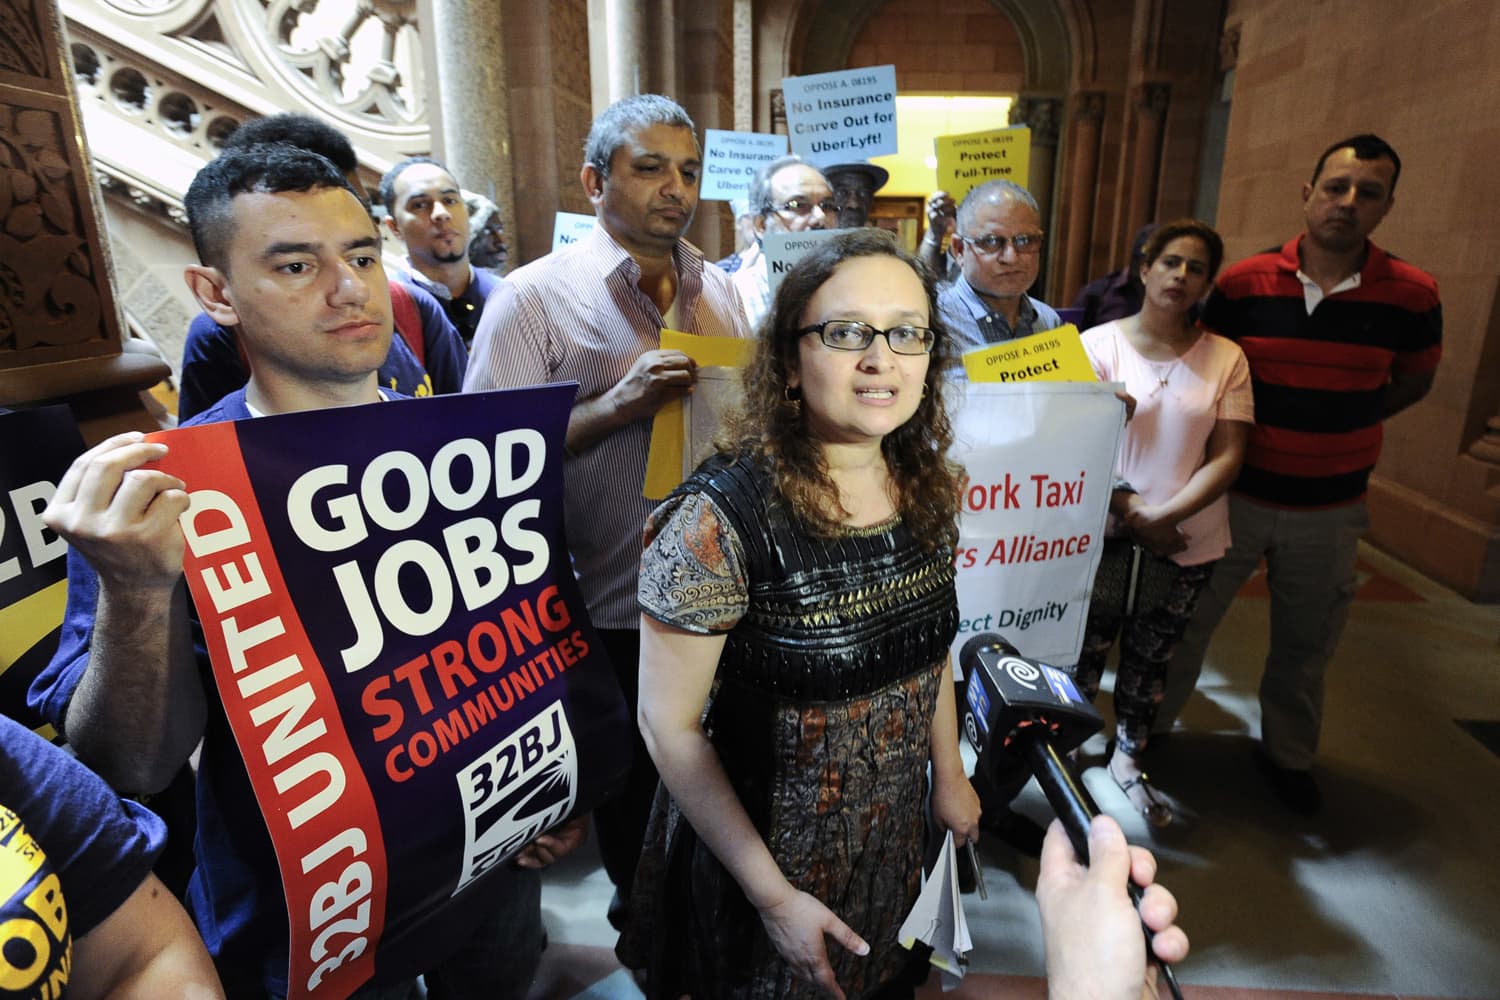 Bhairavi Desai, executive director of the New York Taxi Workers Alliance, center, speaks against allowing Uber and other app-based drivers to expand service to upstate New York at the state Capitol in Albany, N.Y. (Hans Pennink/AP)